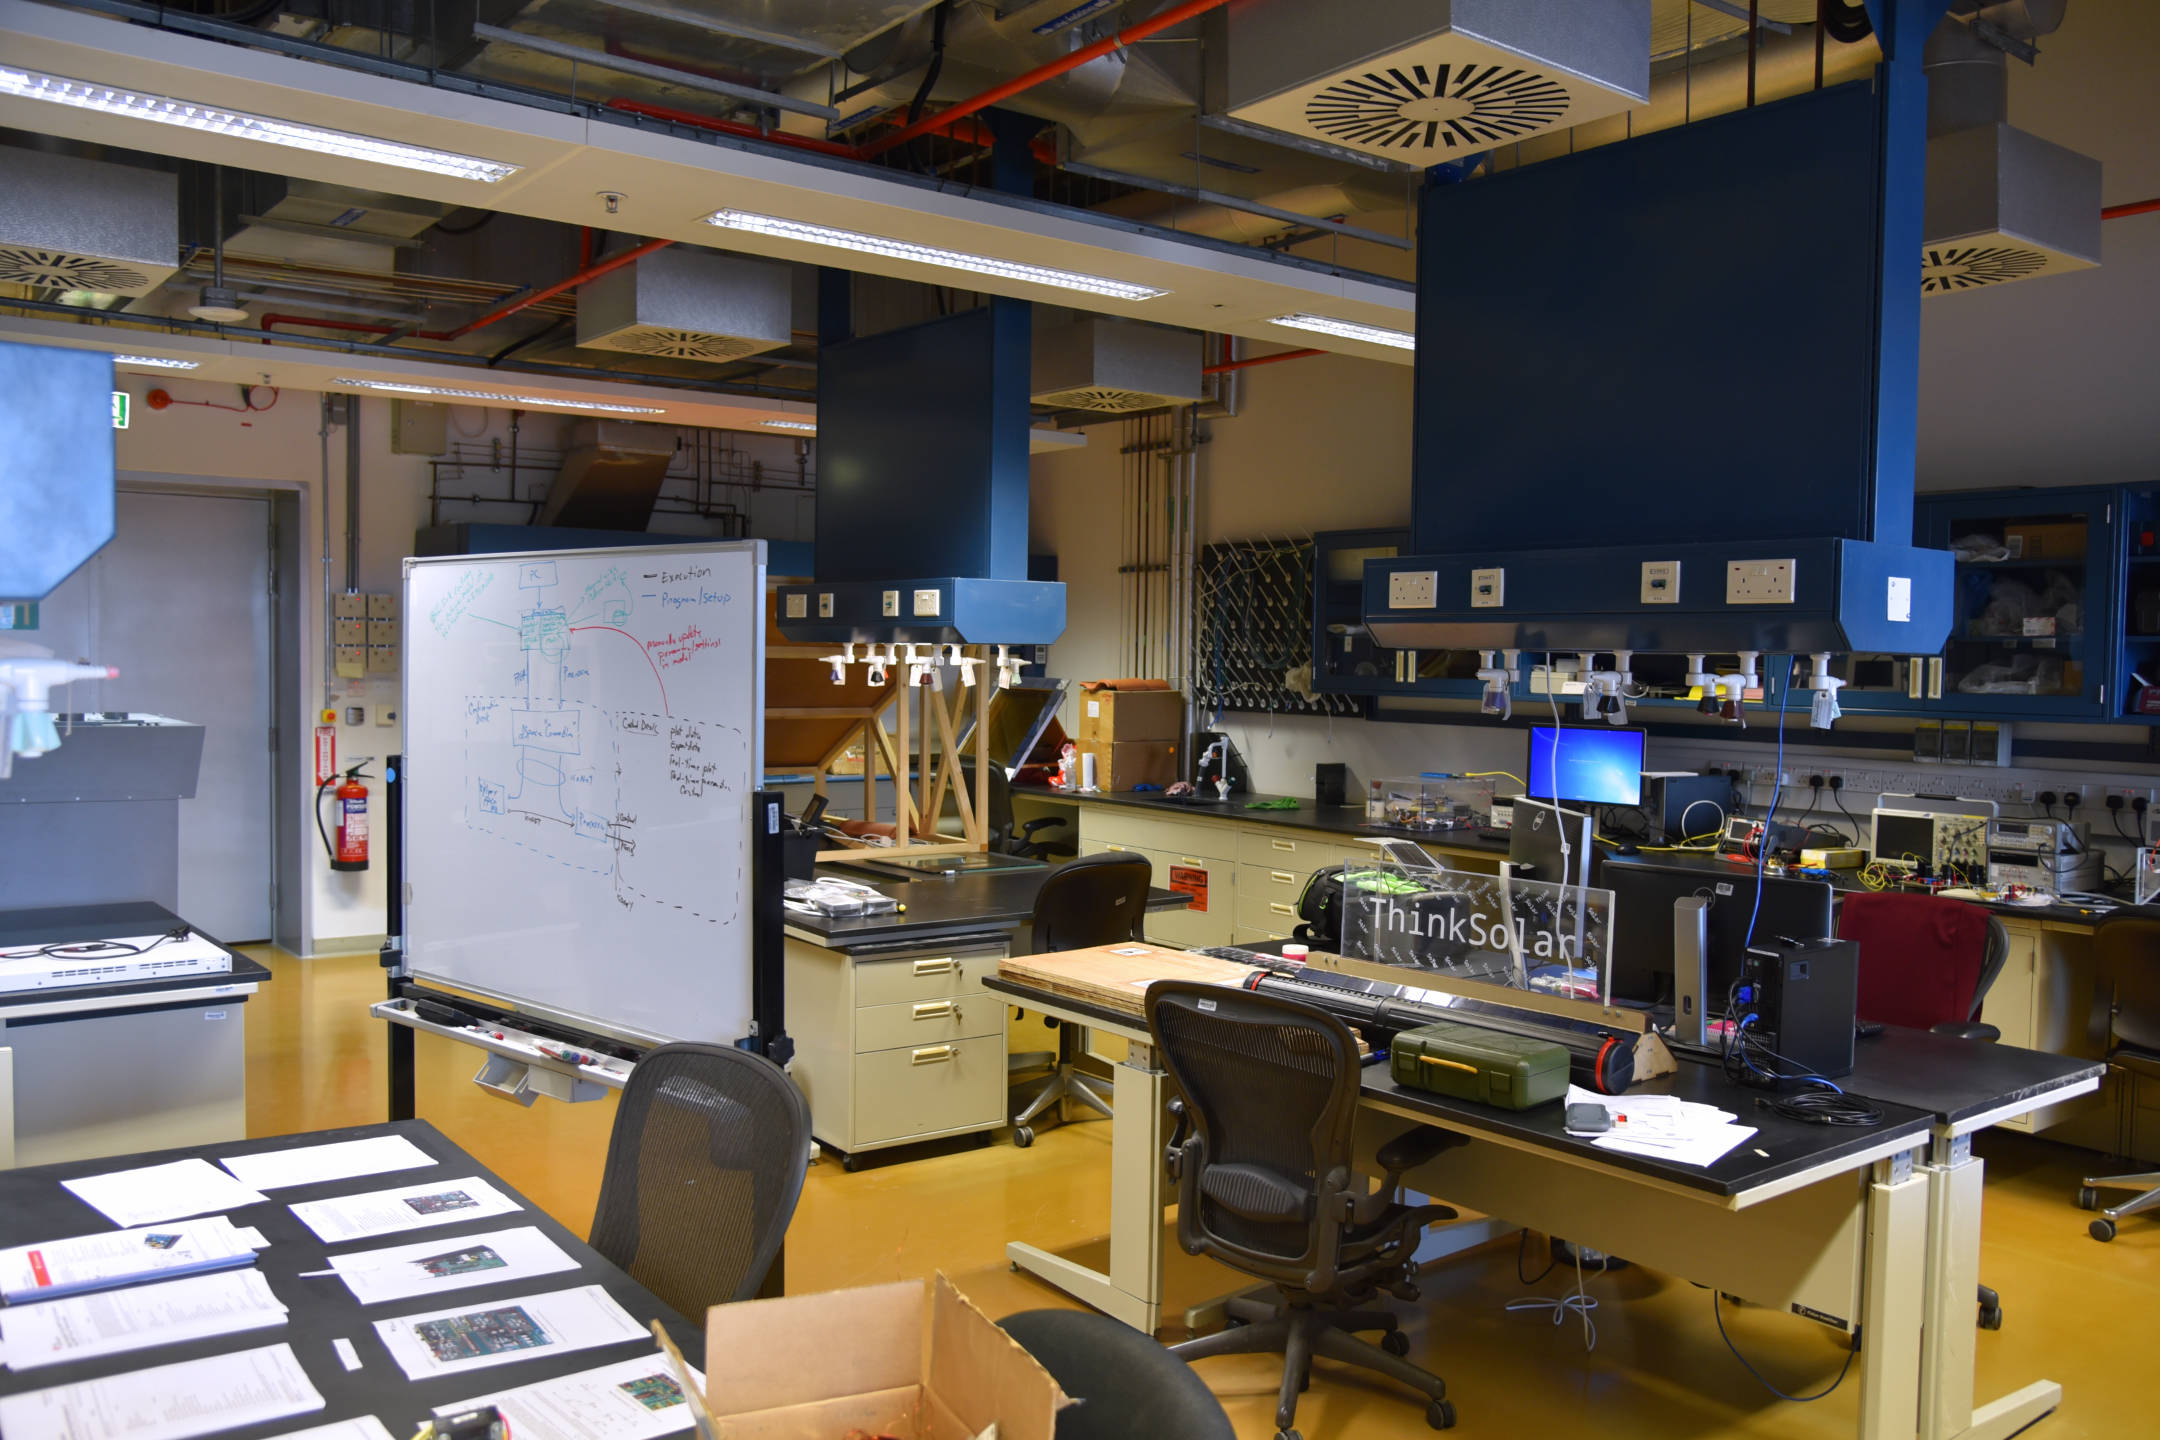 REAPER Lab's dedicated work space in Texas A&M's Qatar campus is fully equipped for our team's research projects.